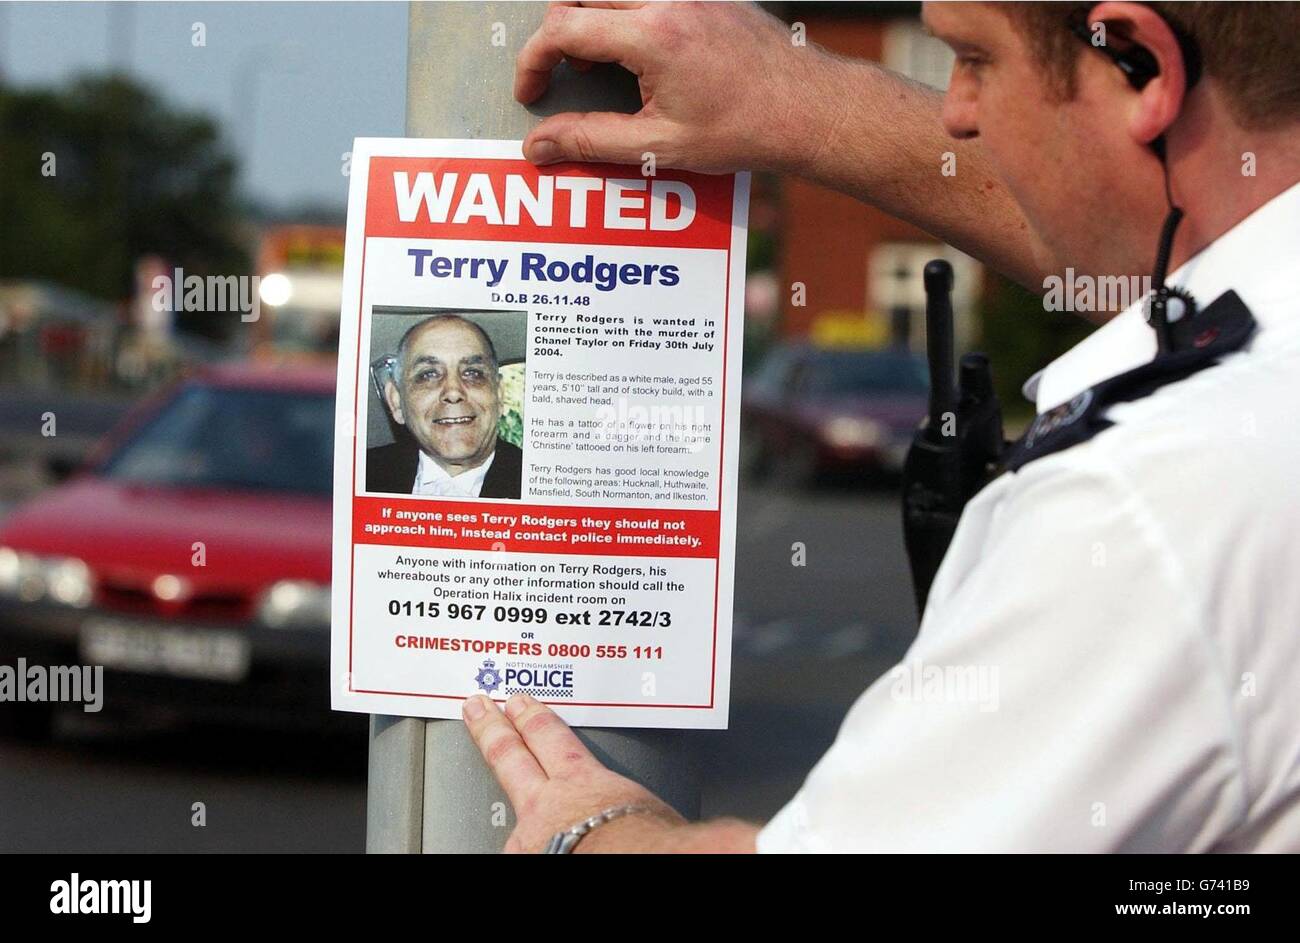 Nottinghamshire Police hand out 'Wanted' leaflets for murder suspect Terry Rodgers at Sutton-in-Ashfield and Hucknall in Nottinghamshire. Terry Rodgers went missing almost a week ago after his daughter, Chanel Taylor, was shot in the head in her home in Huthwaite, Nottinghamshire. Police have still not found the murder weapon and warned people not to approach the tattooed 55-year-old, who they believe could be in hiding following the shooting. Stock Photo